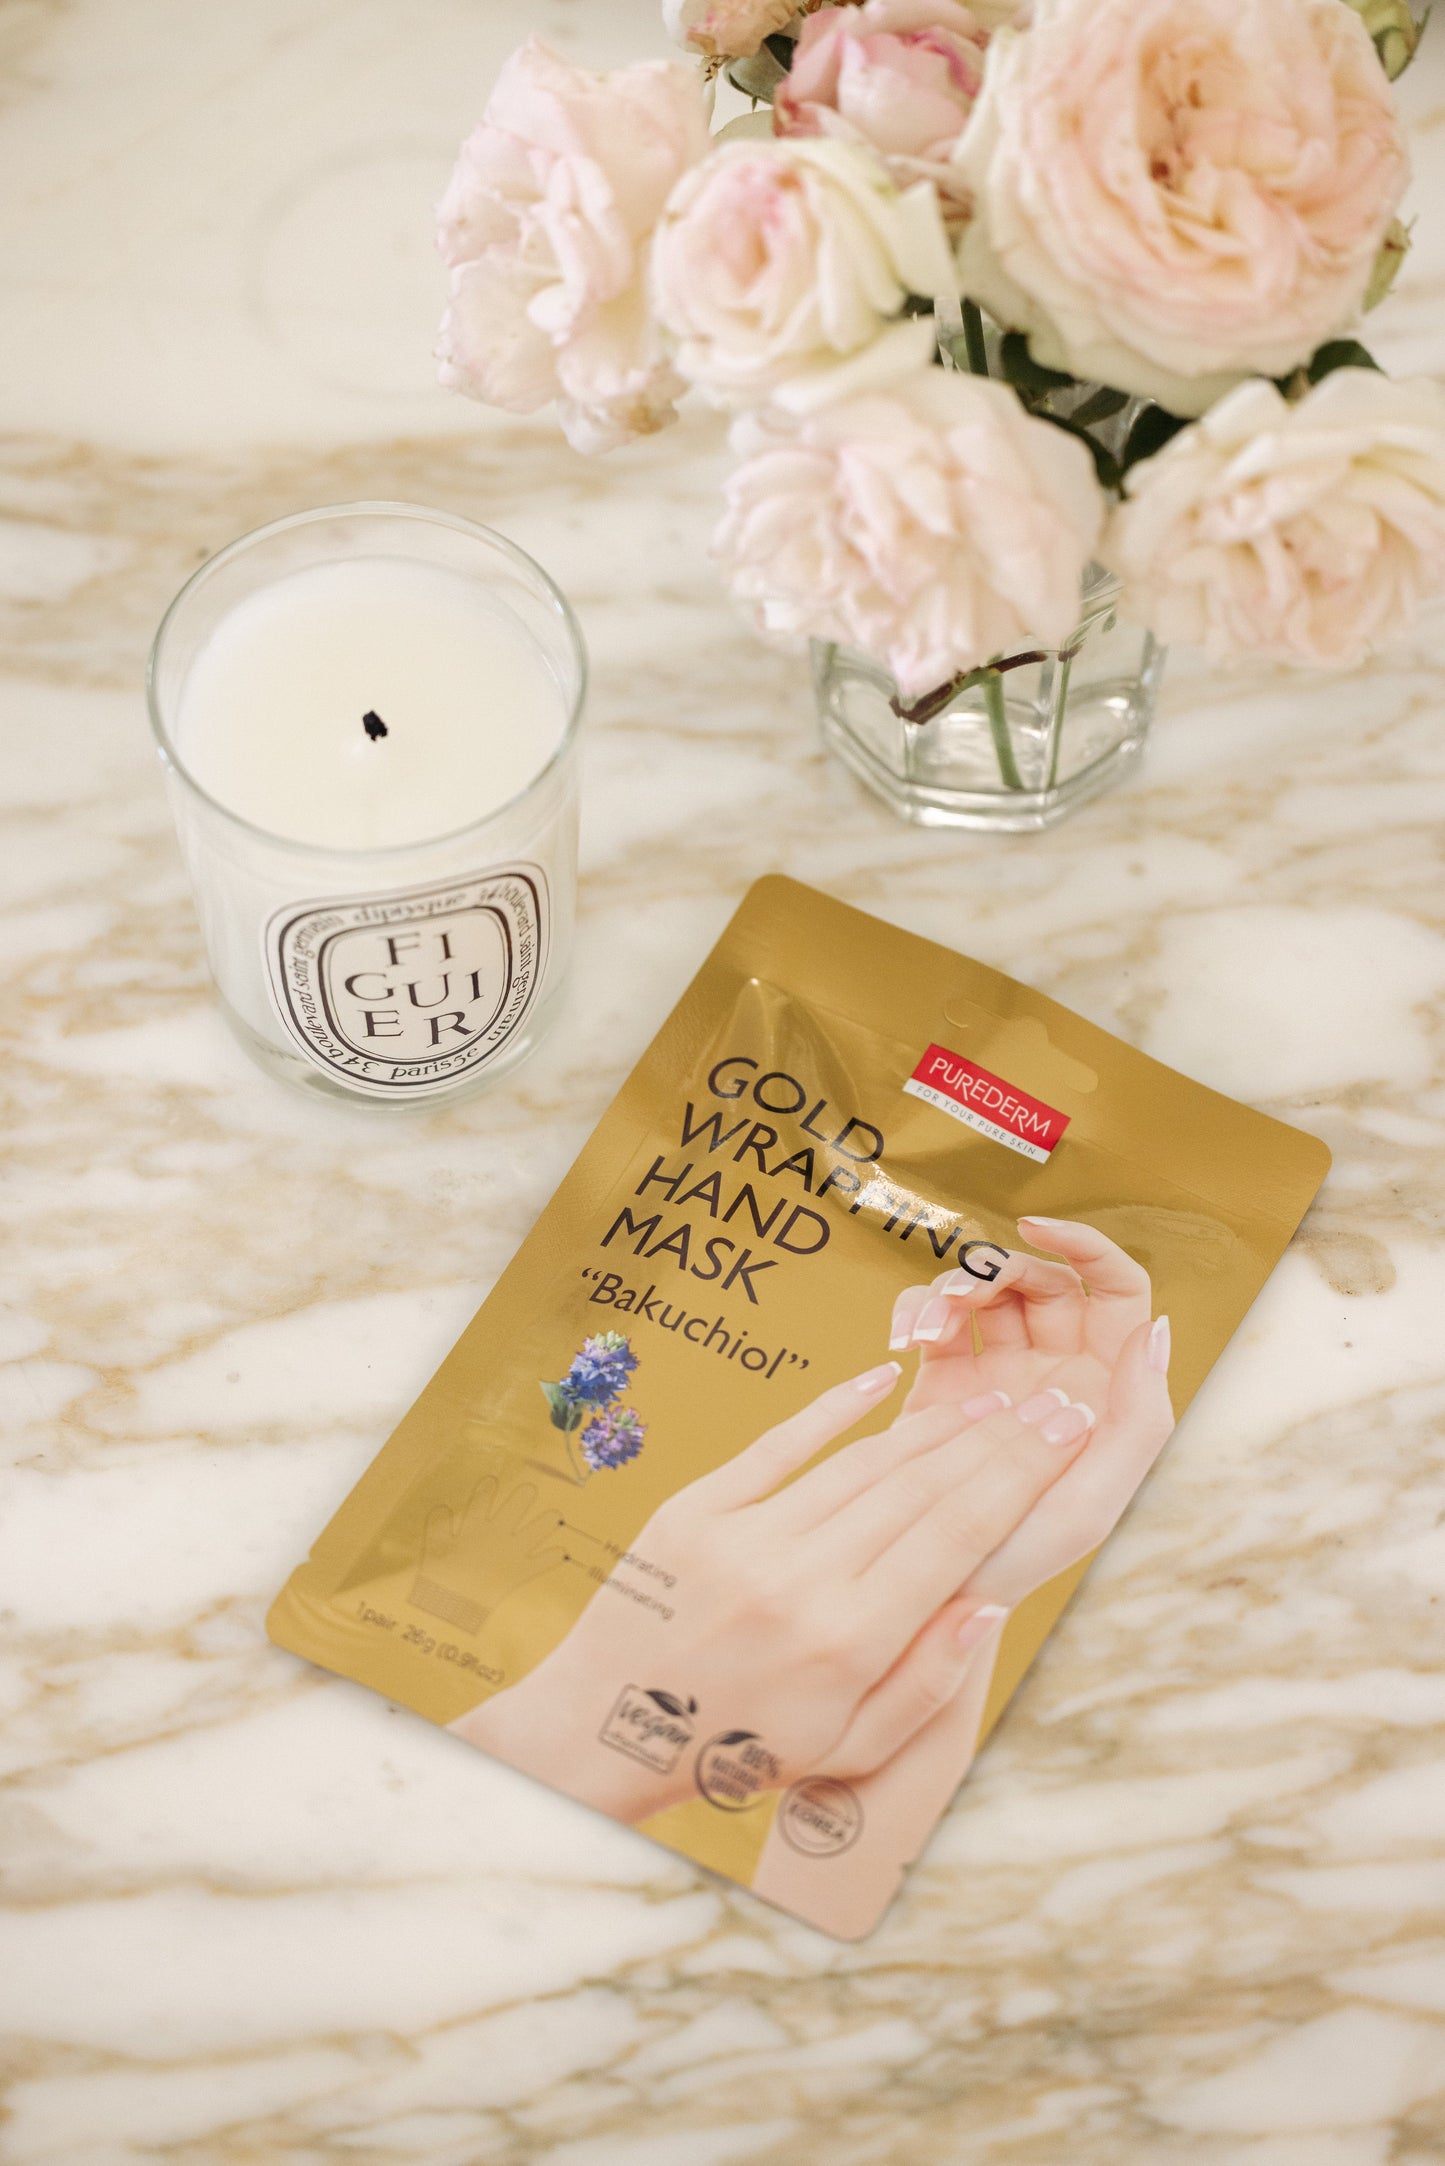 Gold wrapping foot mask “peptide”